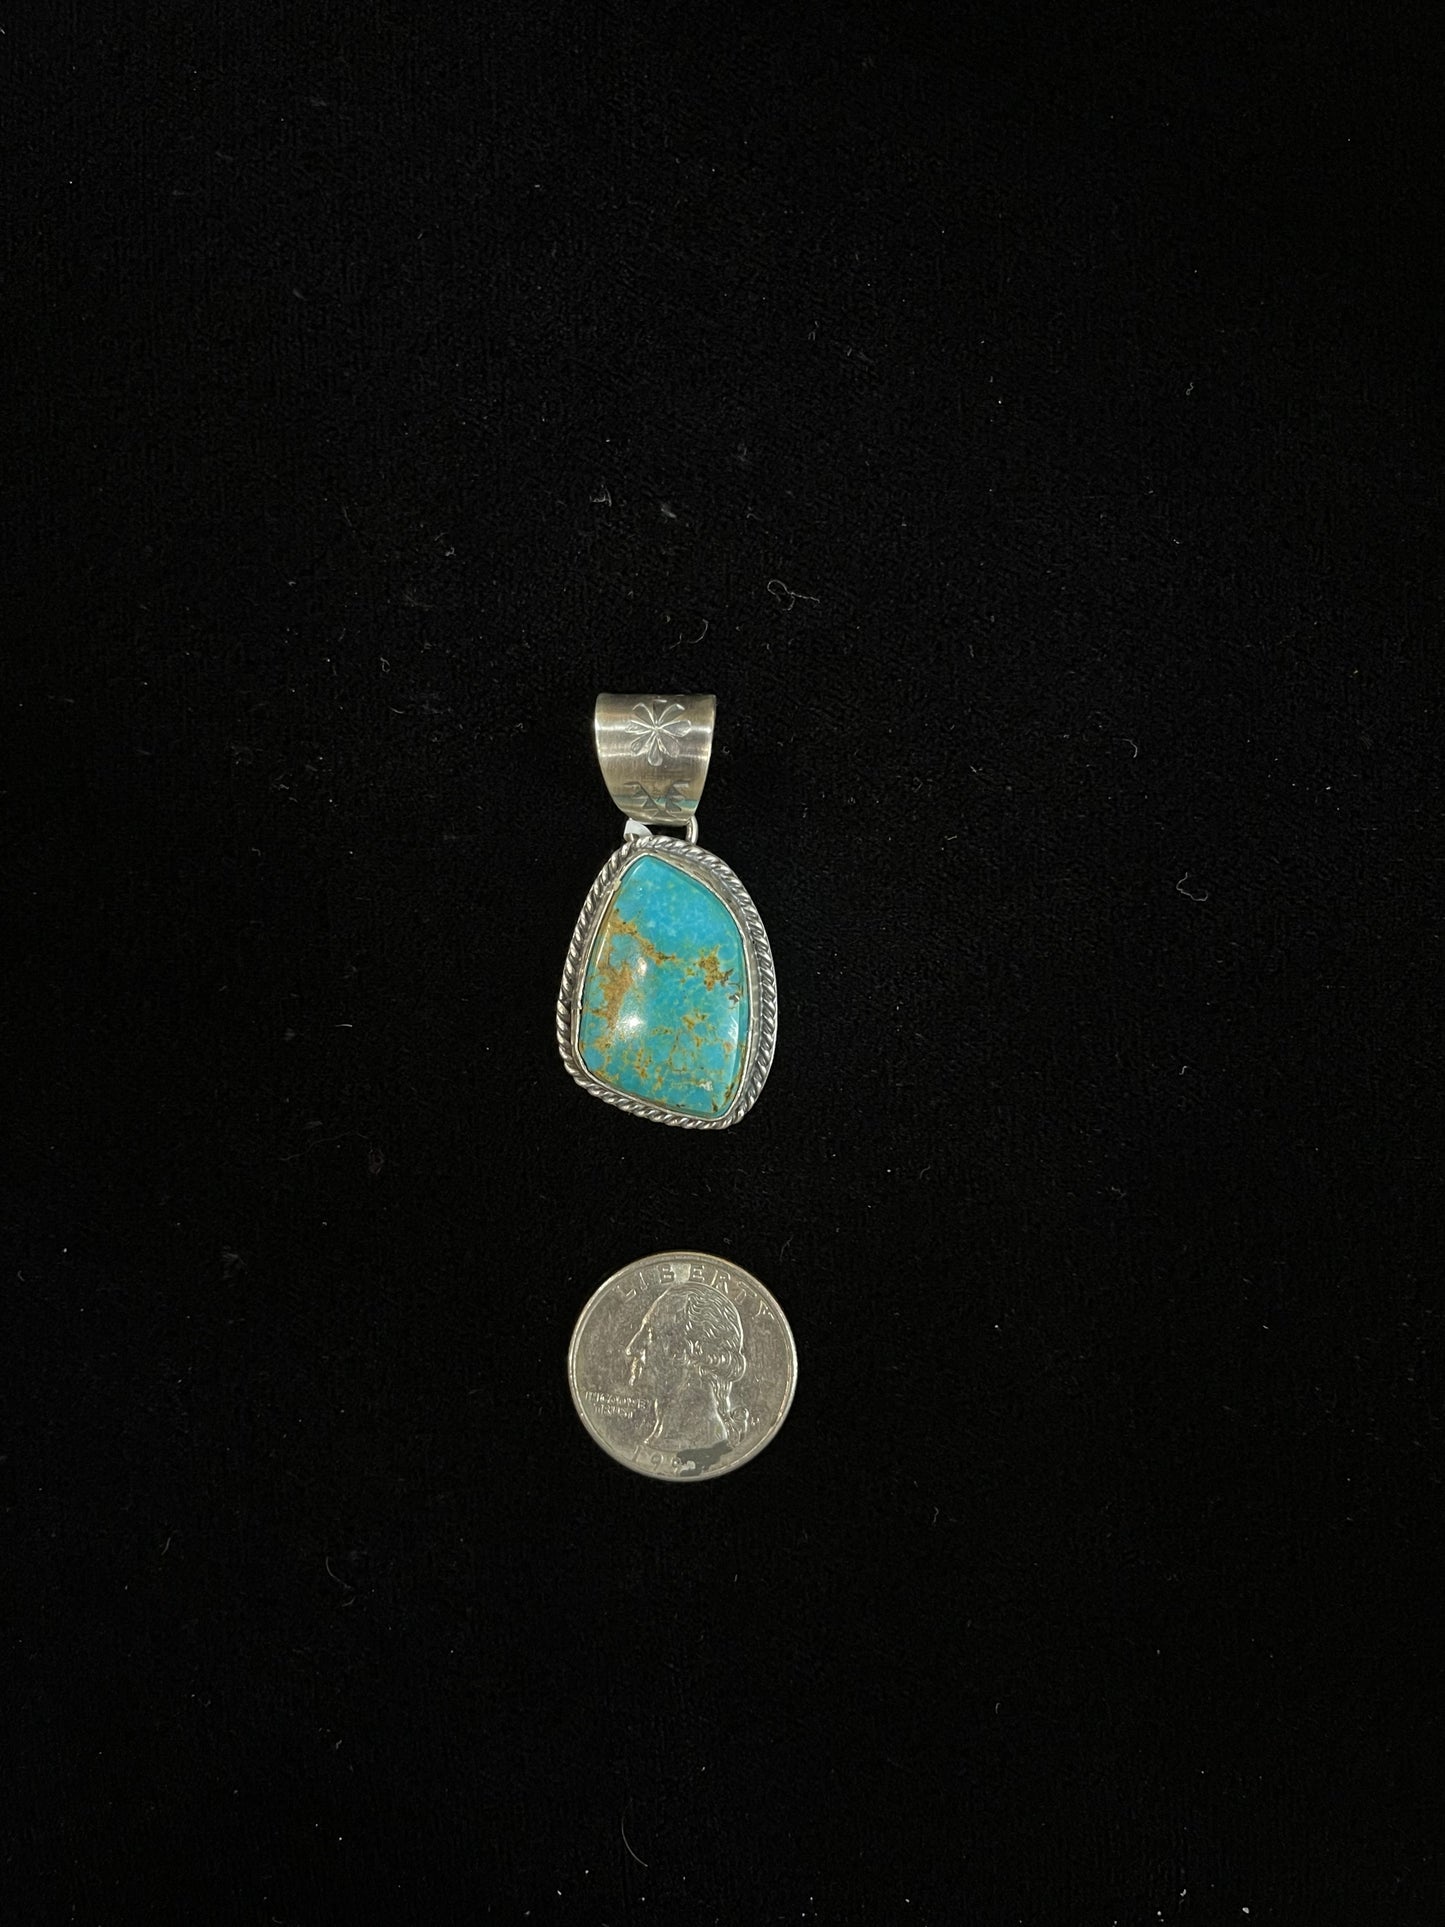 Turquoise Pendant by Ned Nez, Navajo